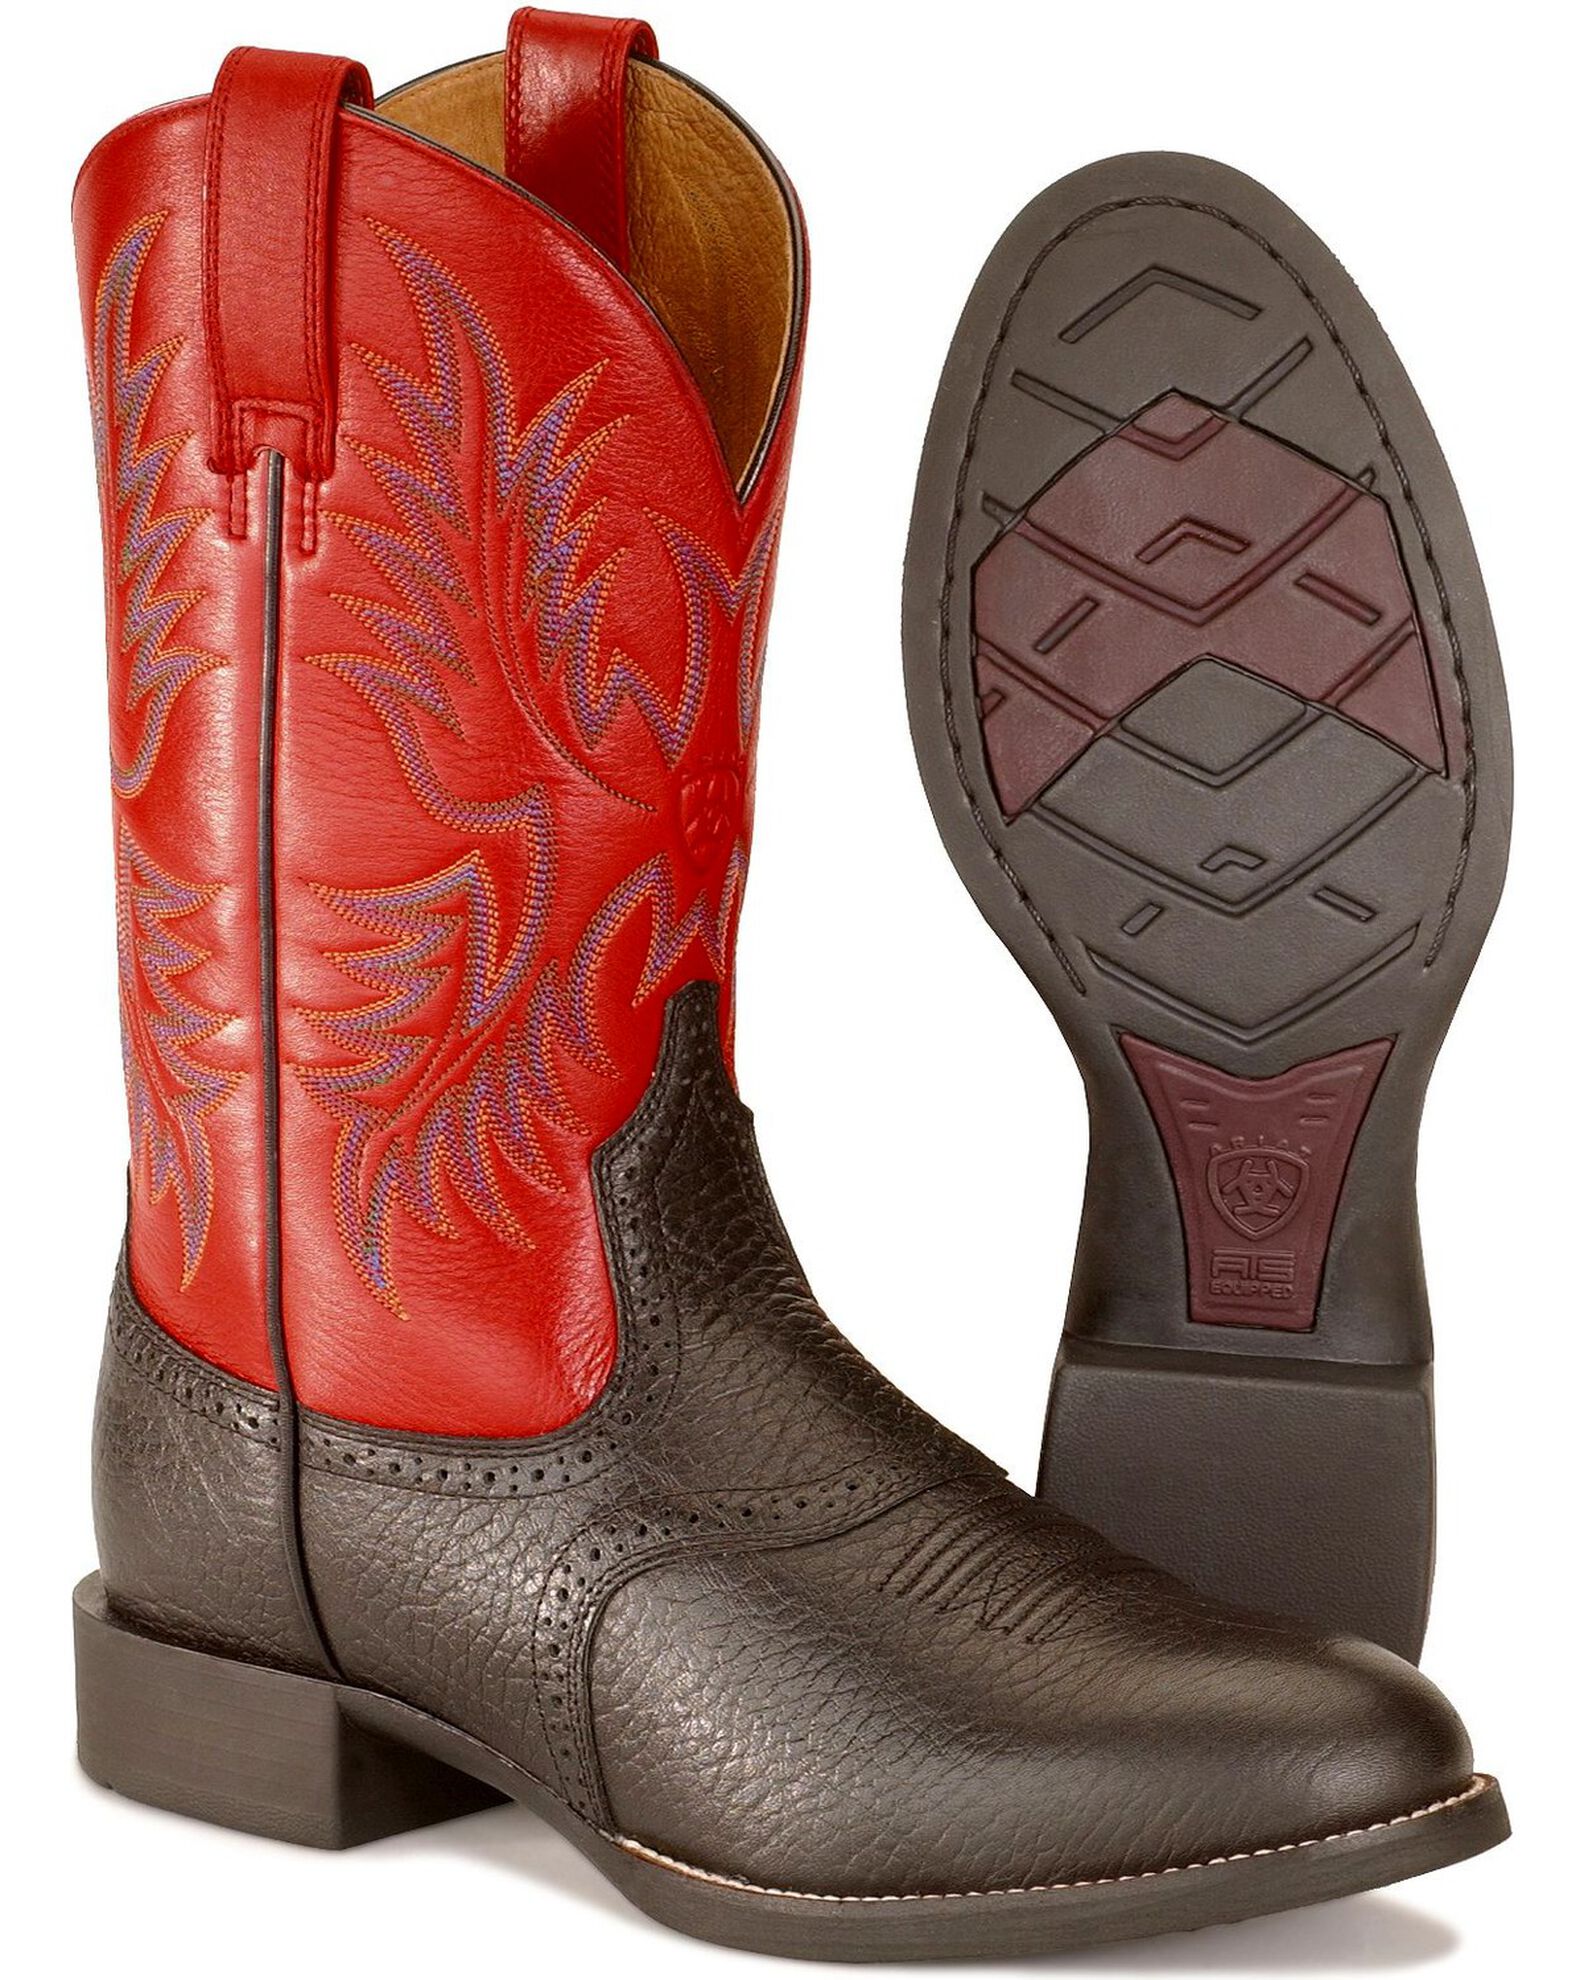 Ariat Men's Heritage Western Performance Boots - Round Toe